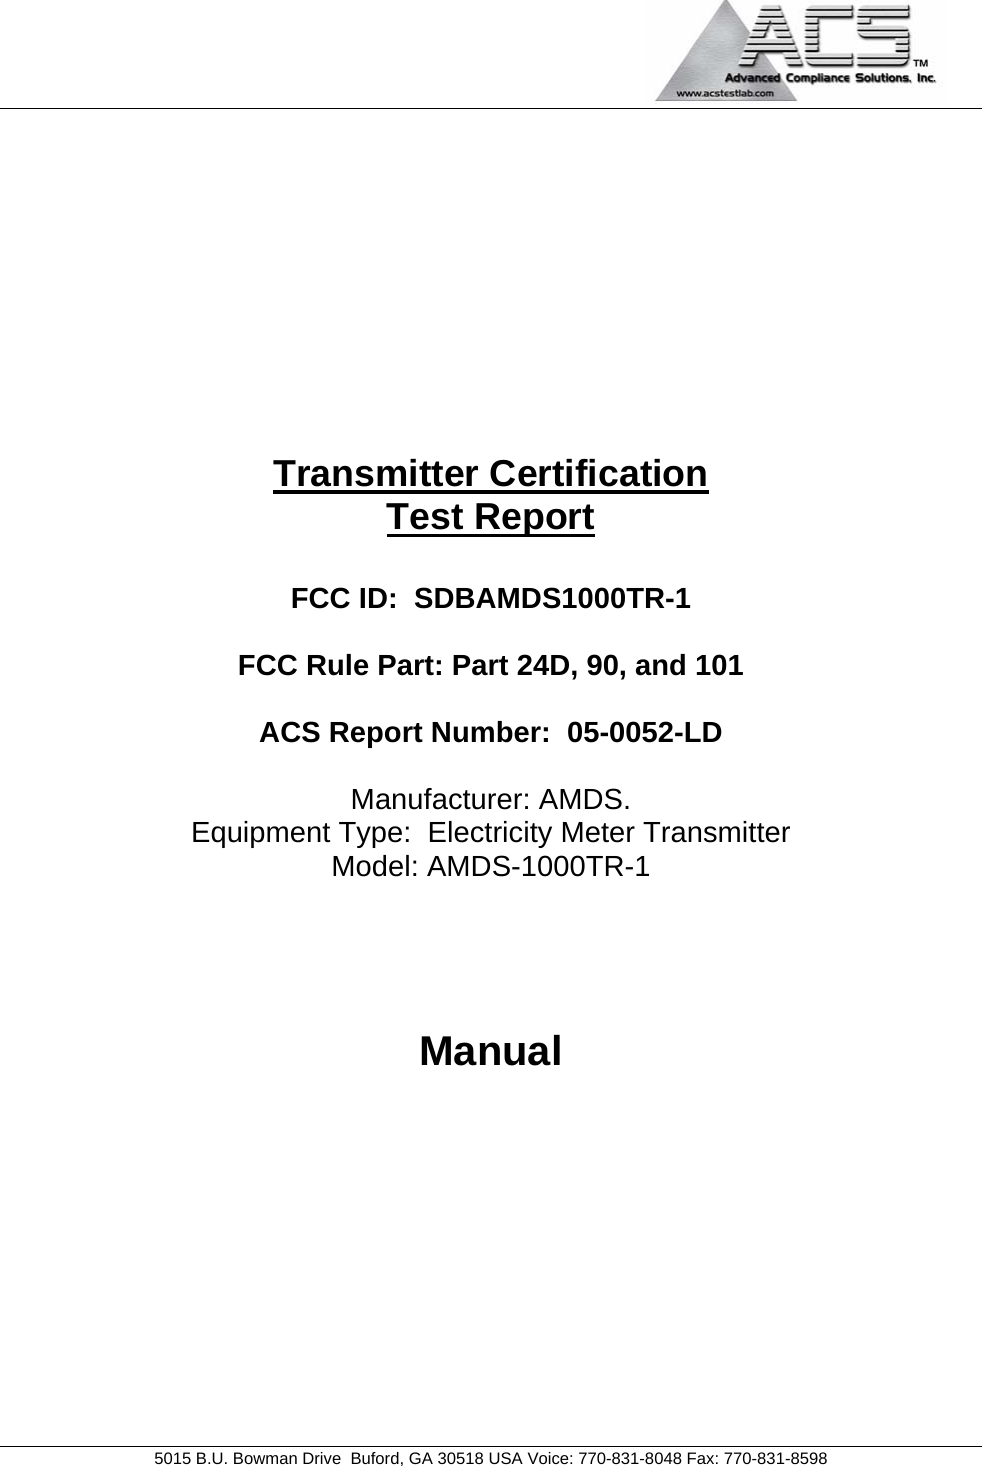                                             5015 B.U. Bowman Drive  Buford, GA 30518 USA Voice: 770-831-8048 Fax: 770-831-8598   Transmitter Certification Test Report  FCC ID:  SDBAMDS1000TR-1  FCC Rule Part: Part 24D, 90, and 101  ACS Report Number:  05-0052-LD   Manufacturer: AMDS. Equipment Type:  Electricity Meter Transmitter Model: AMDS-1000TR-1    Manual  